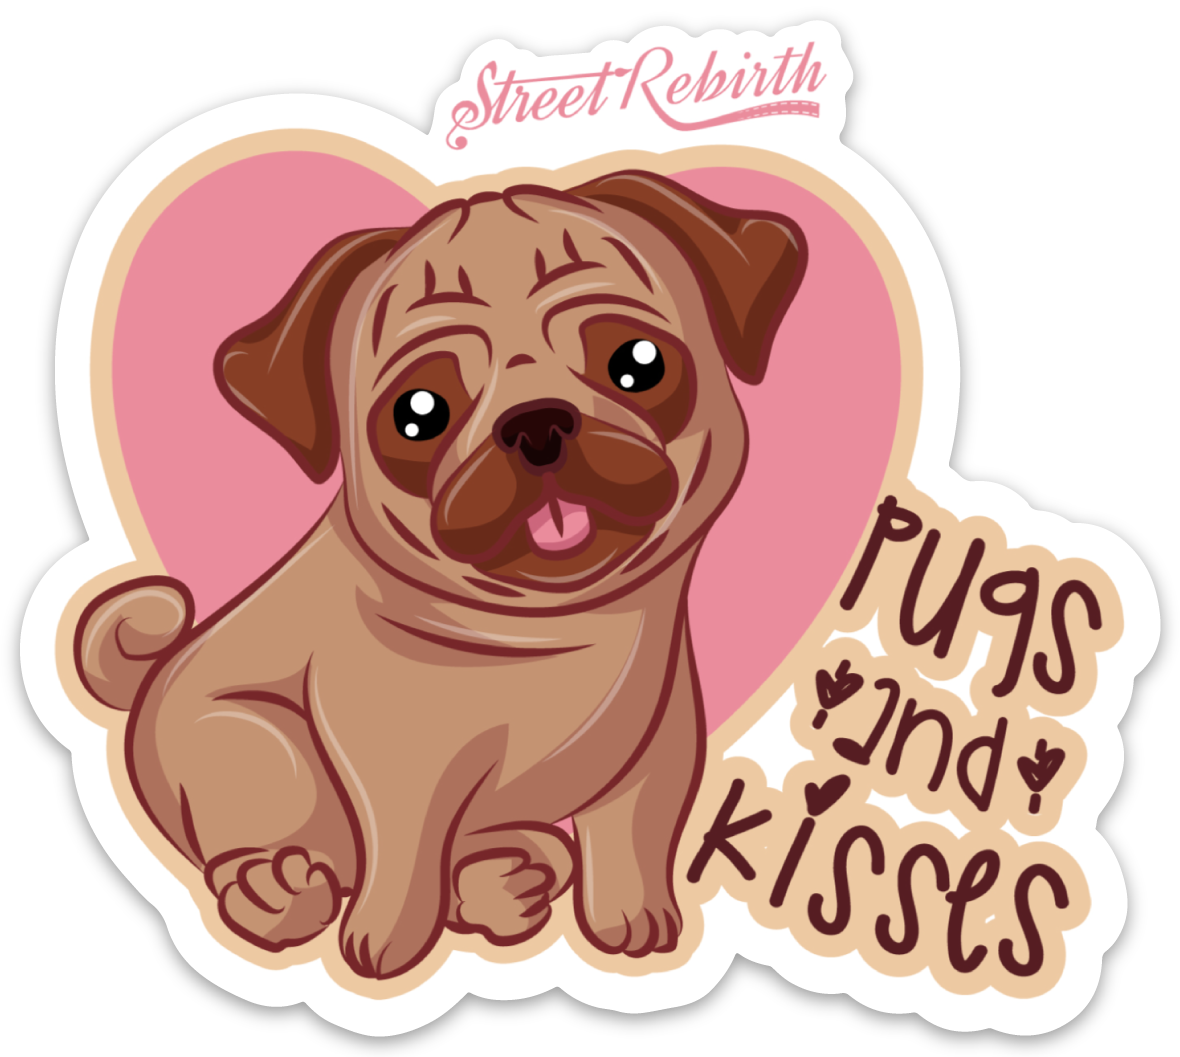 PUGS AND KISSES PUN STICKER – ONE 4 INCH WATER PROOF VINYL STICKER – FOR HYDRO FLASK, SKATEBOARD, LAPTOP, PLANNER, CAR, COLLECTING, GIFTING